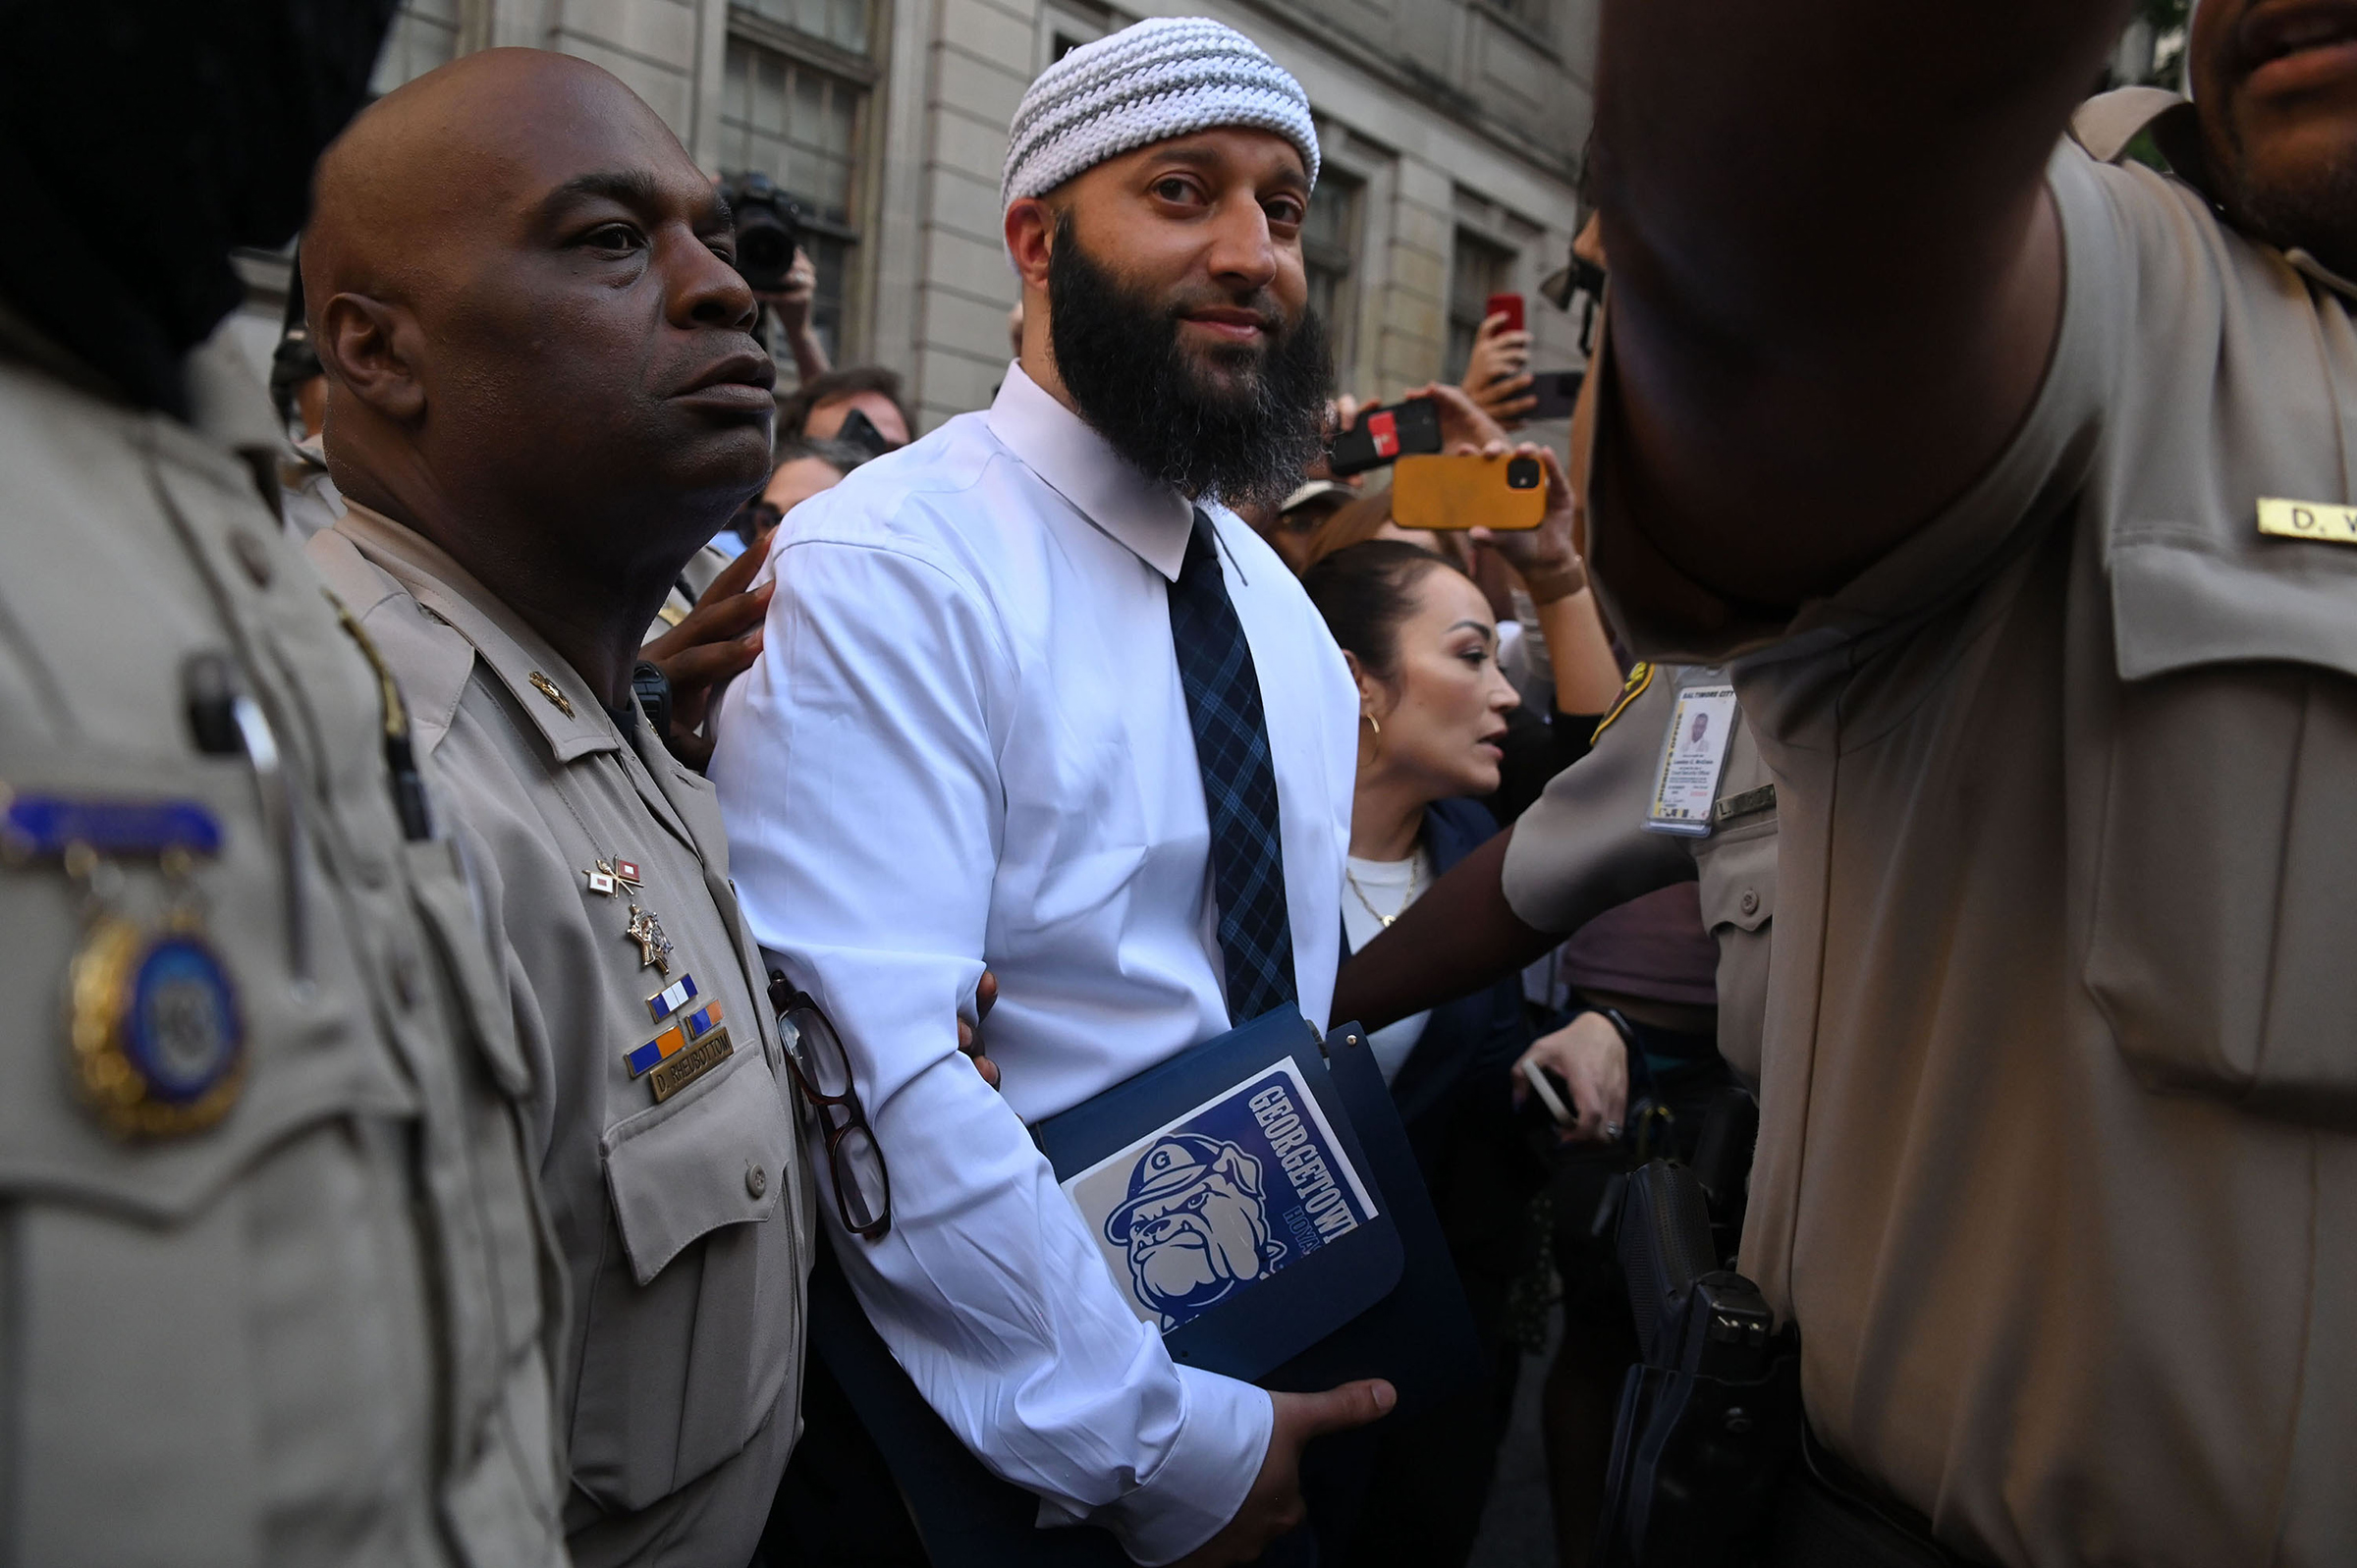 Adnan Syed leaves the courthouse after being released from prison 